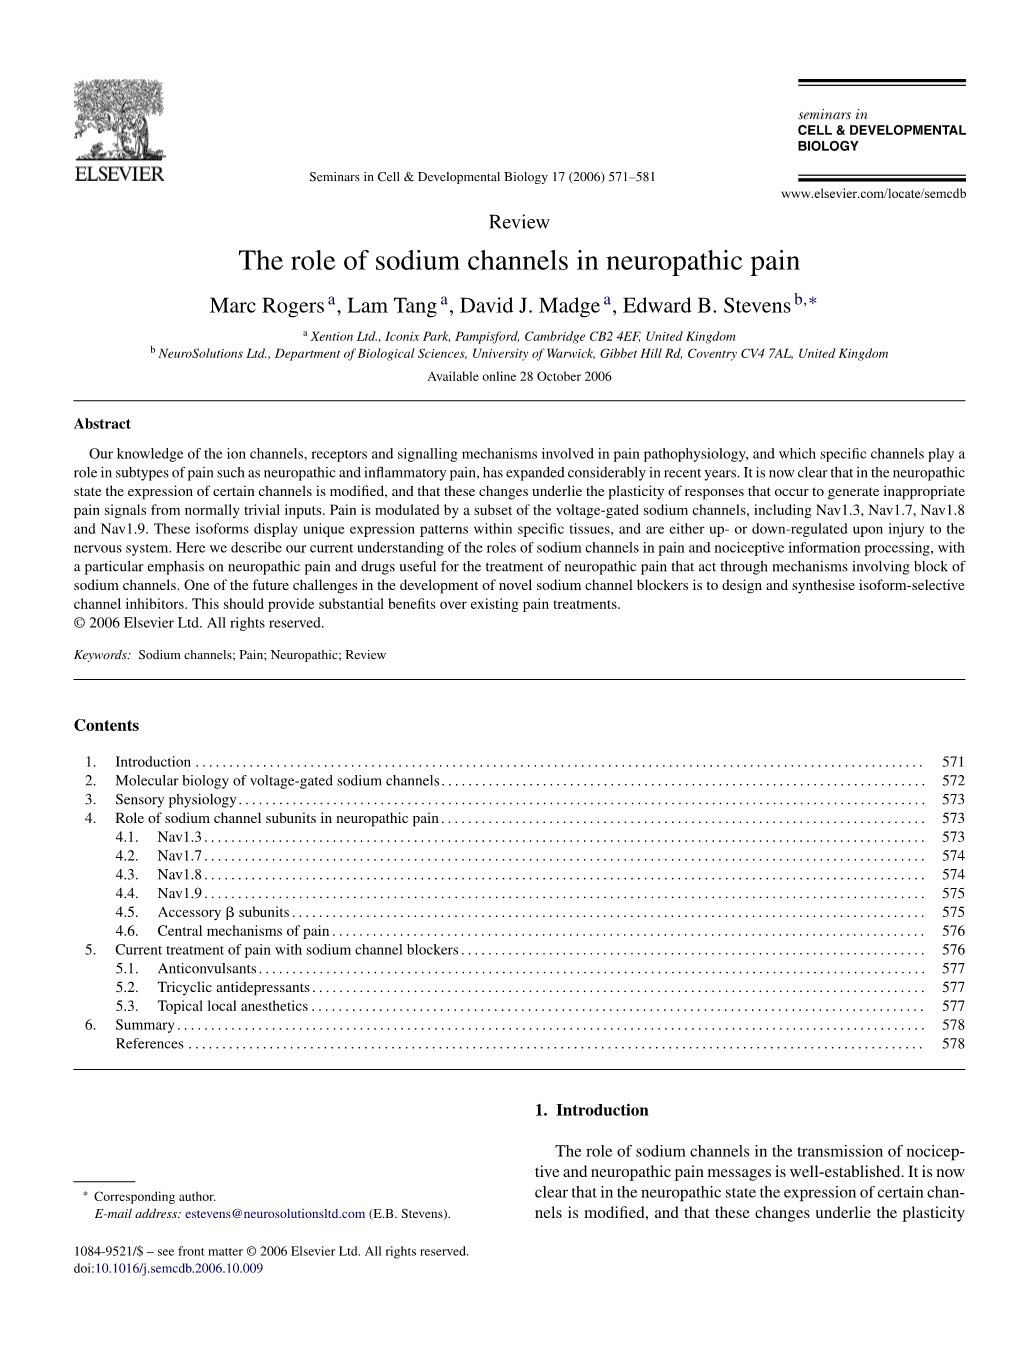 The Role of Sodium Channels in Neuropathic Pain Marc Rogers A, Lam Tang A, David J